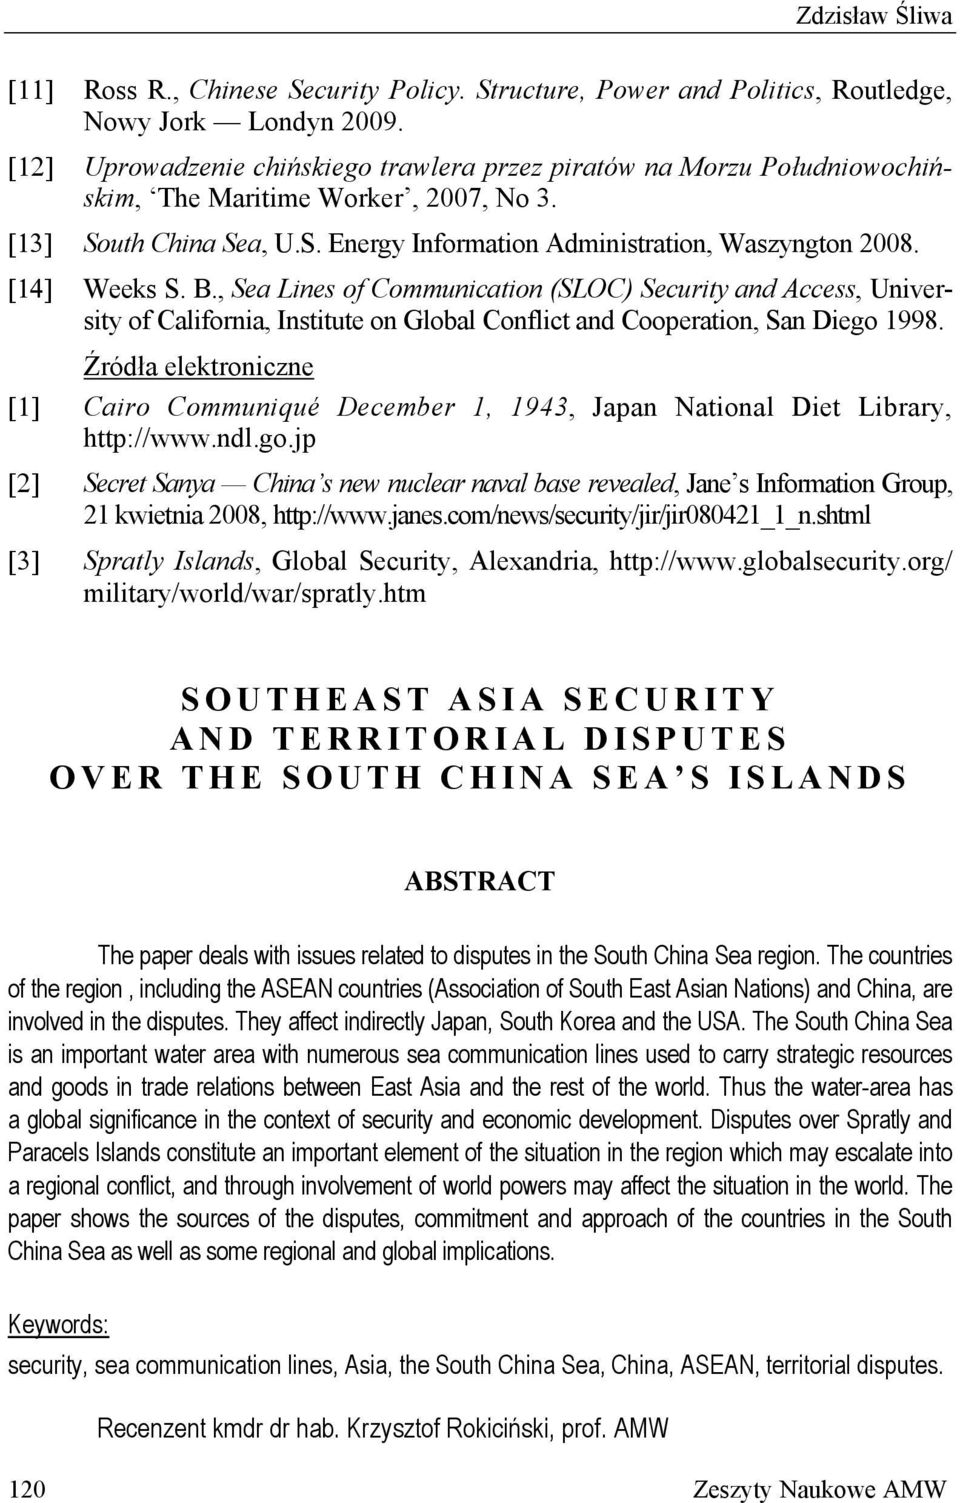 [14] Weeks S. B., Sea Lines of Communication (SLOC) Security and Access, University of California, Institute on Global Conflict and Cooperation, San Diego 1998.